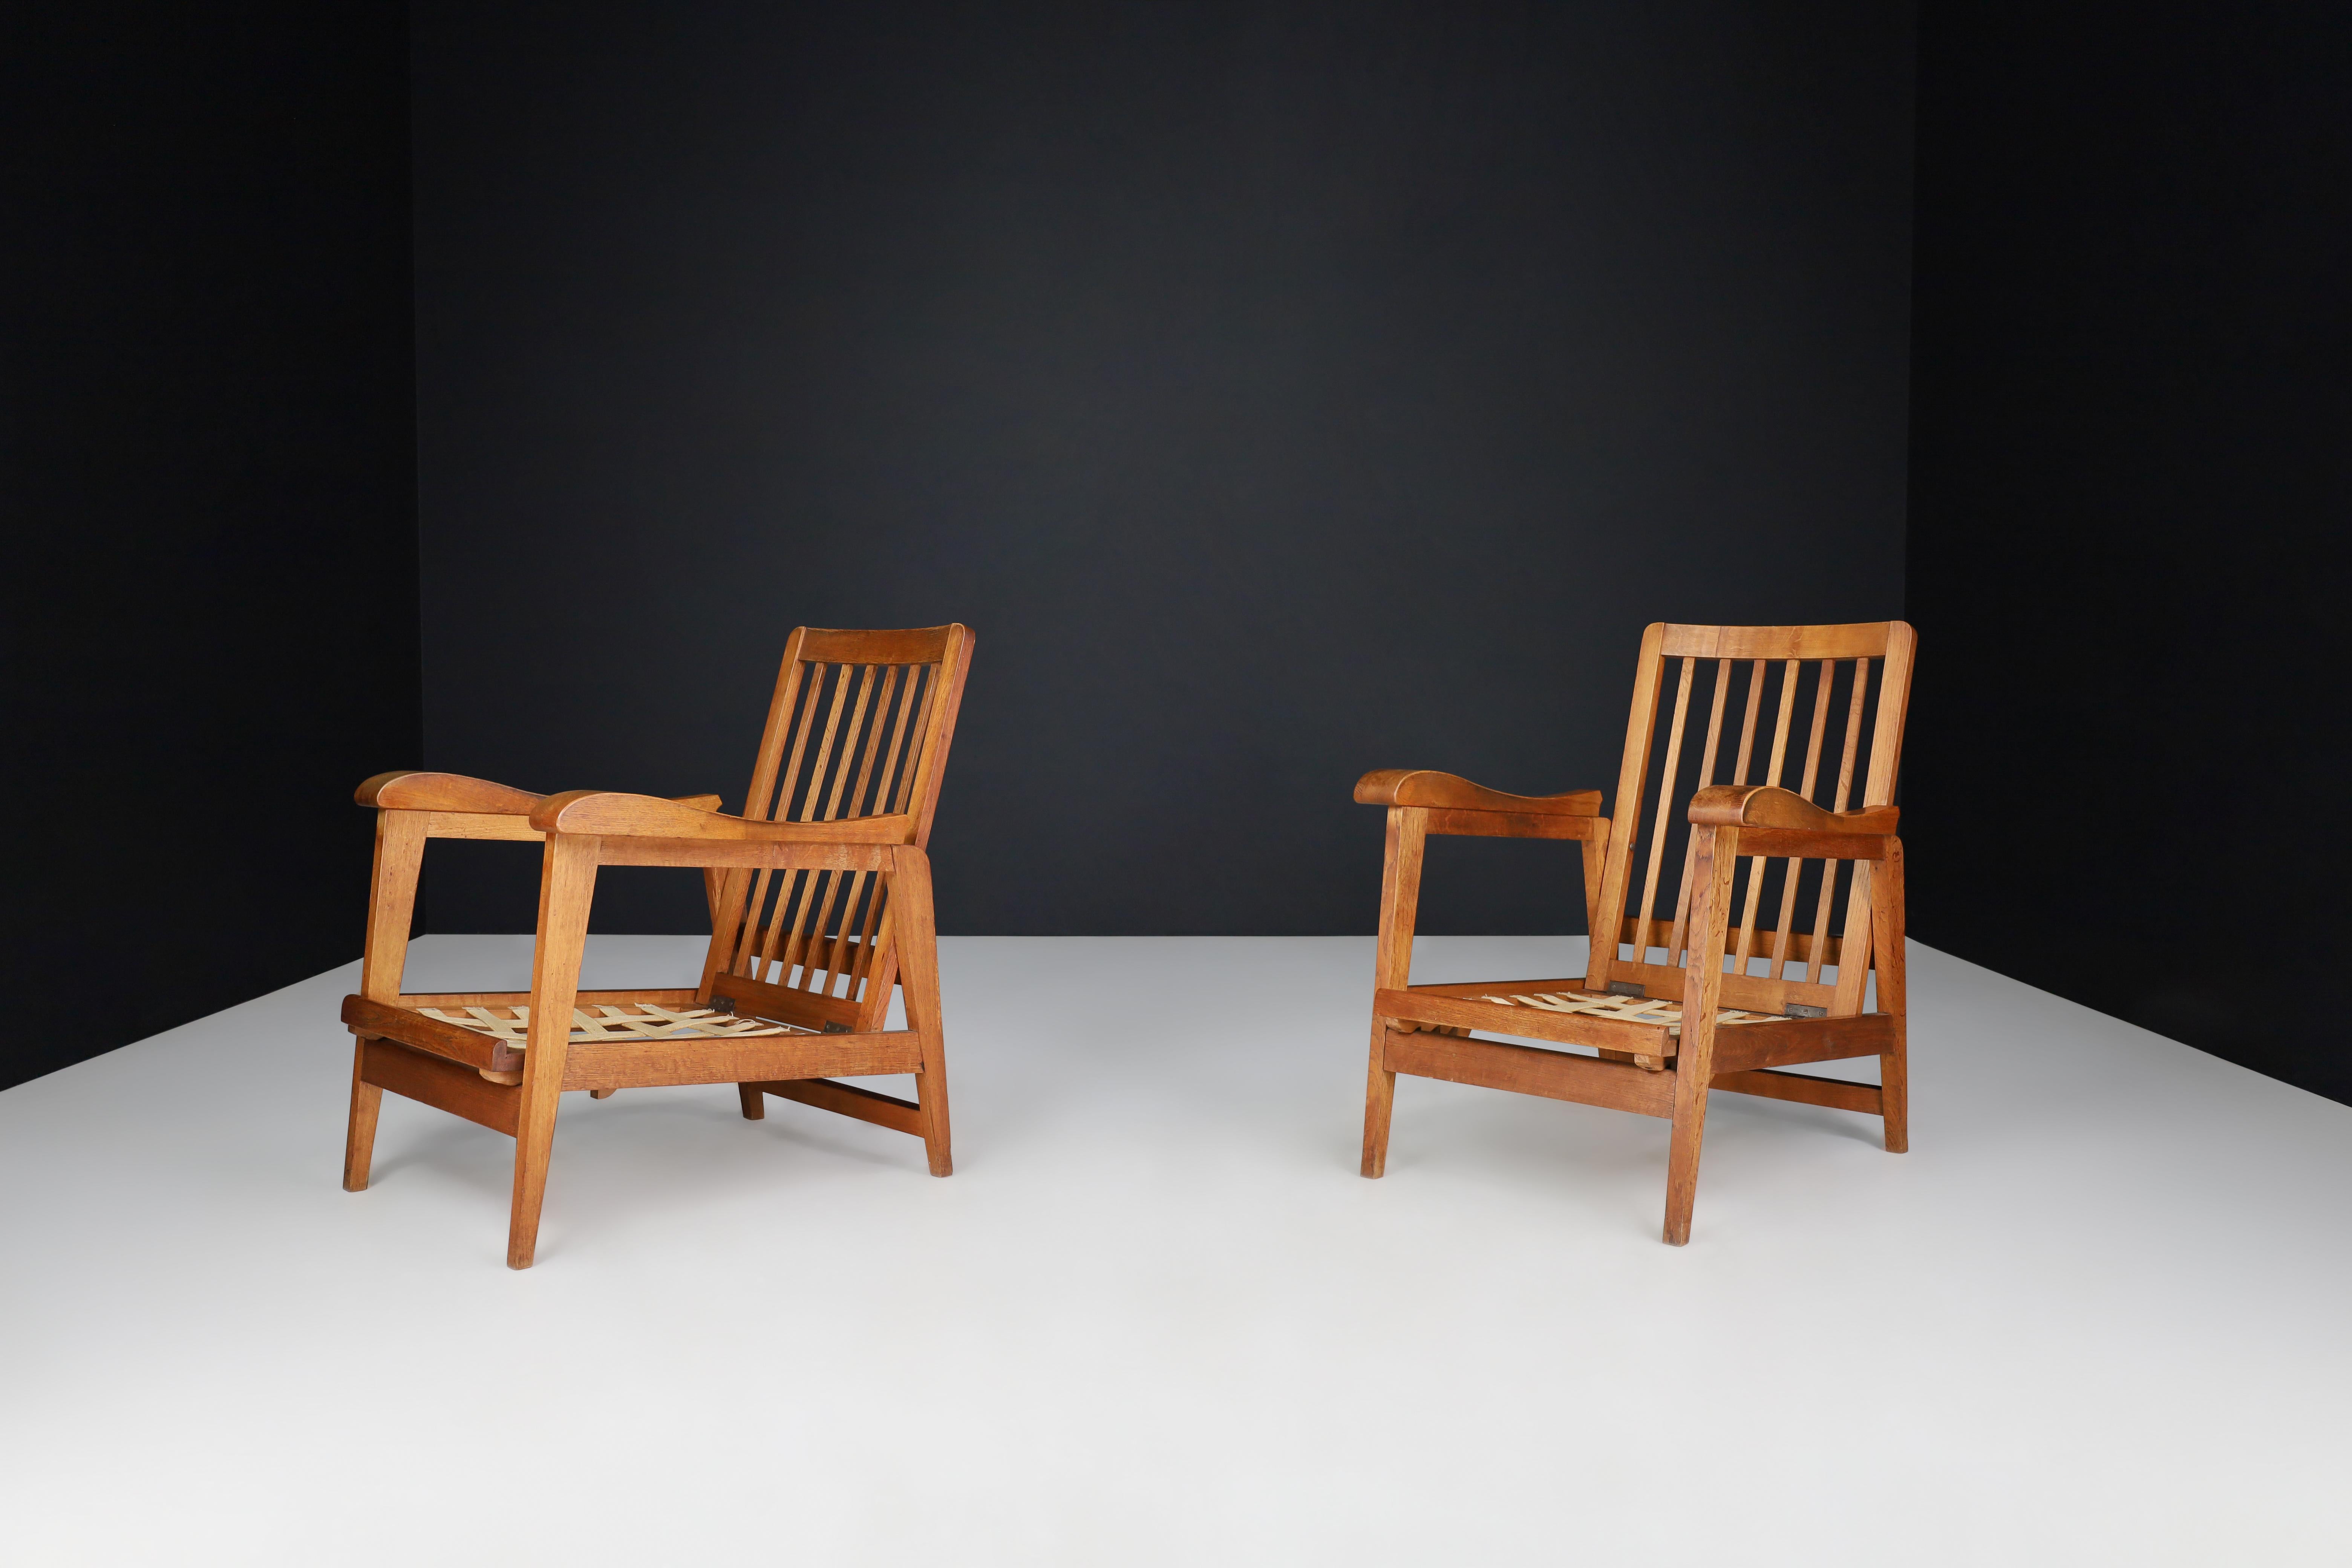 20th Century Brutalist Sculptural Adjustable Lounge Chairs in Oak set of 2 , France, 1950s For Sale